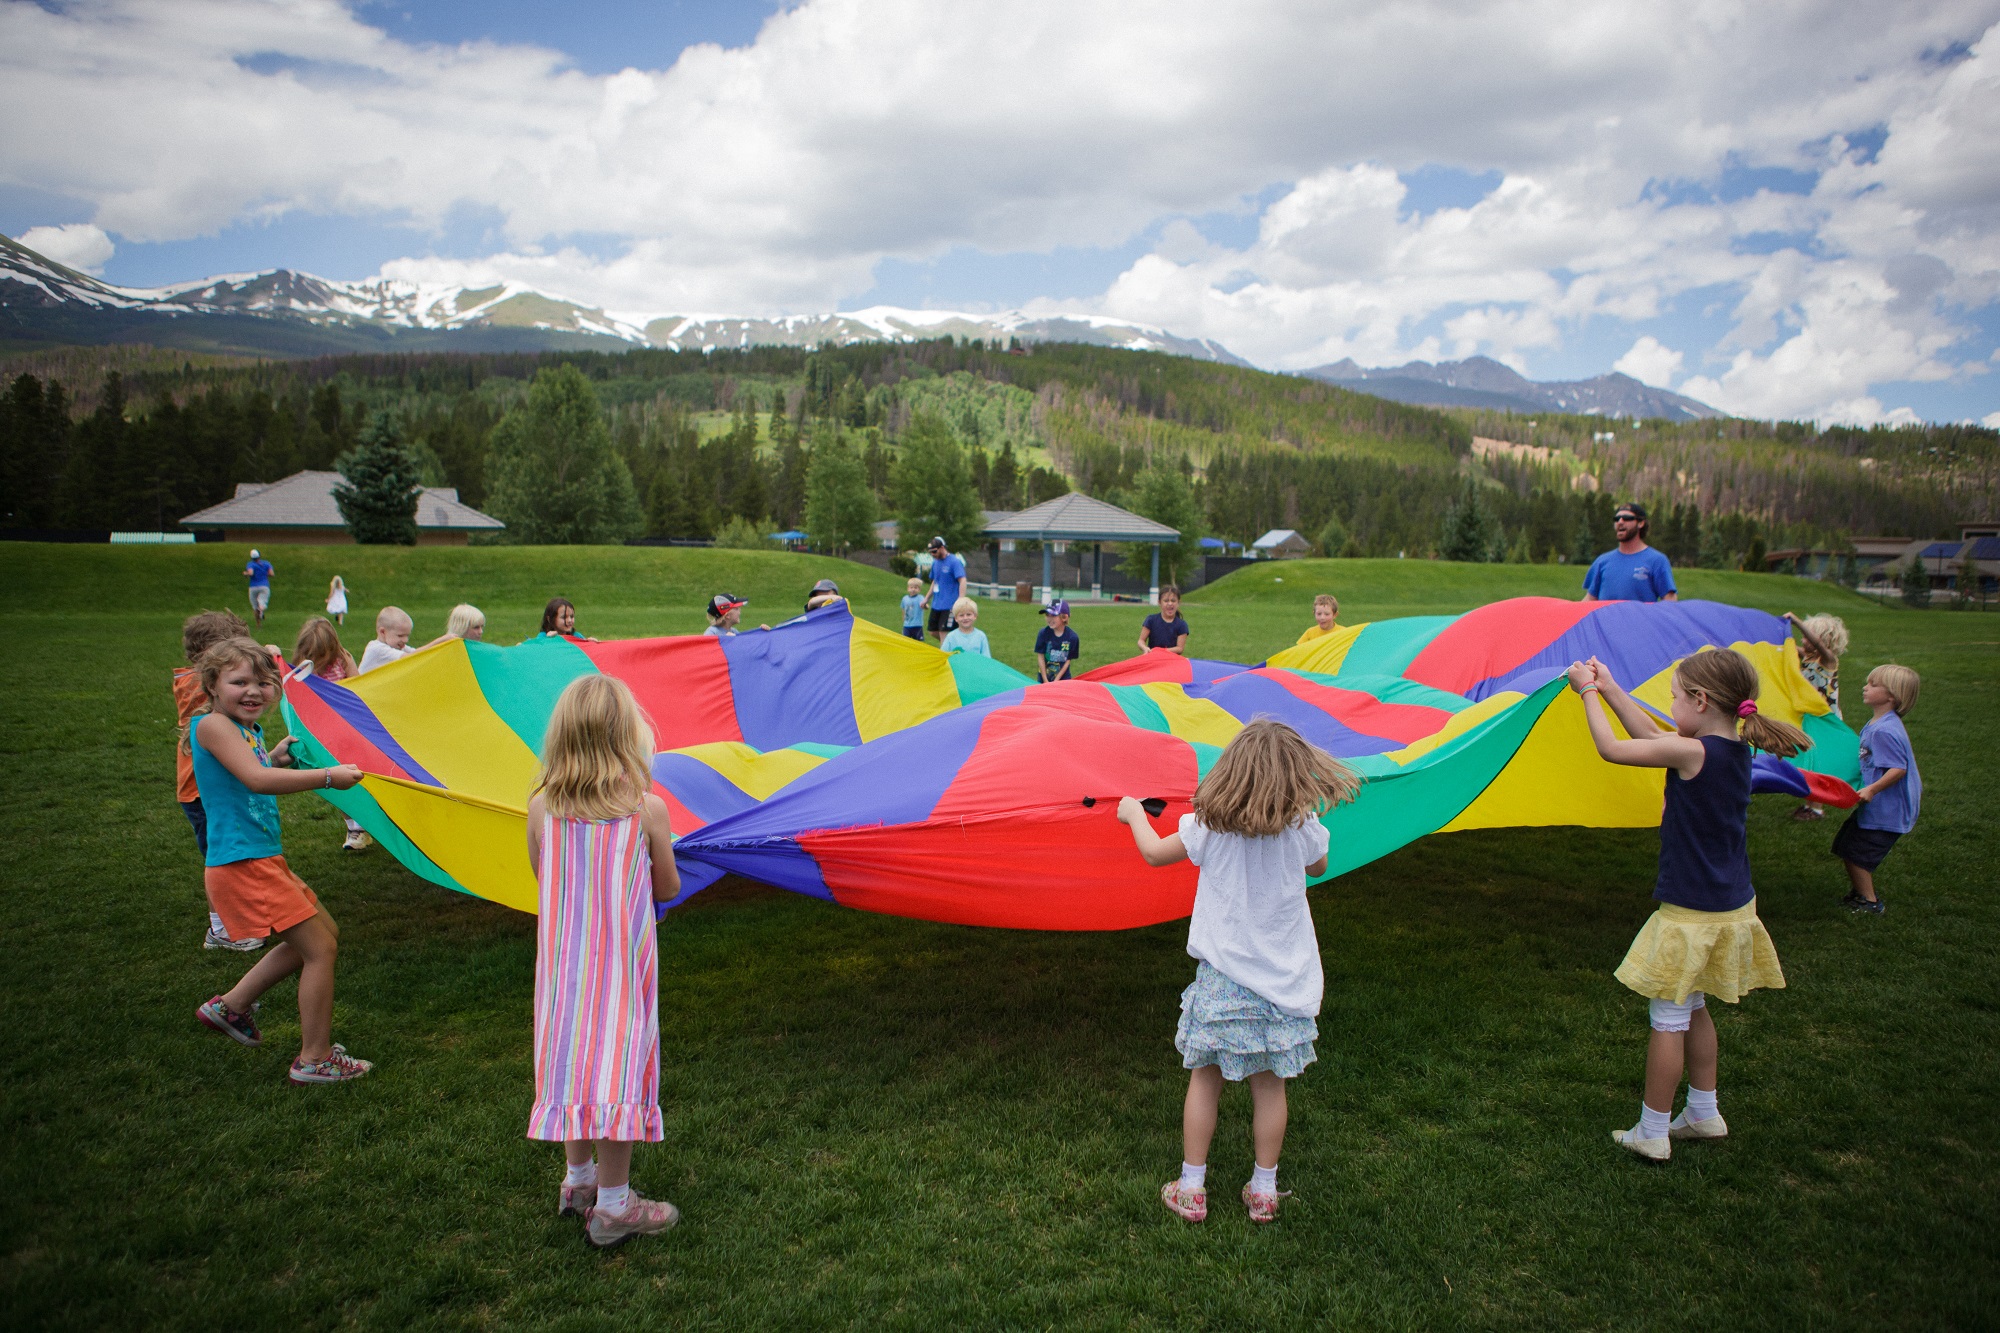 Kids playing with a parachute at Breckenridge Mountain Day Camp on the lawn.